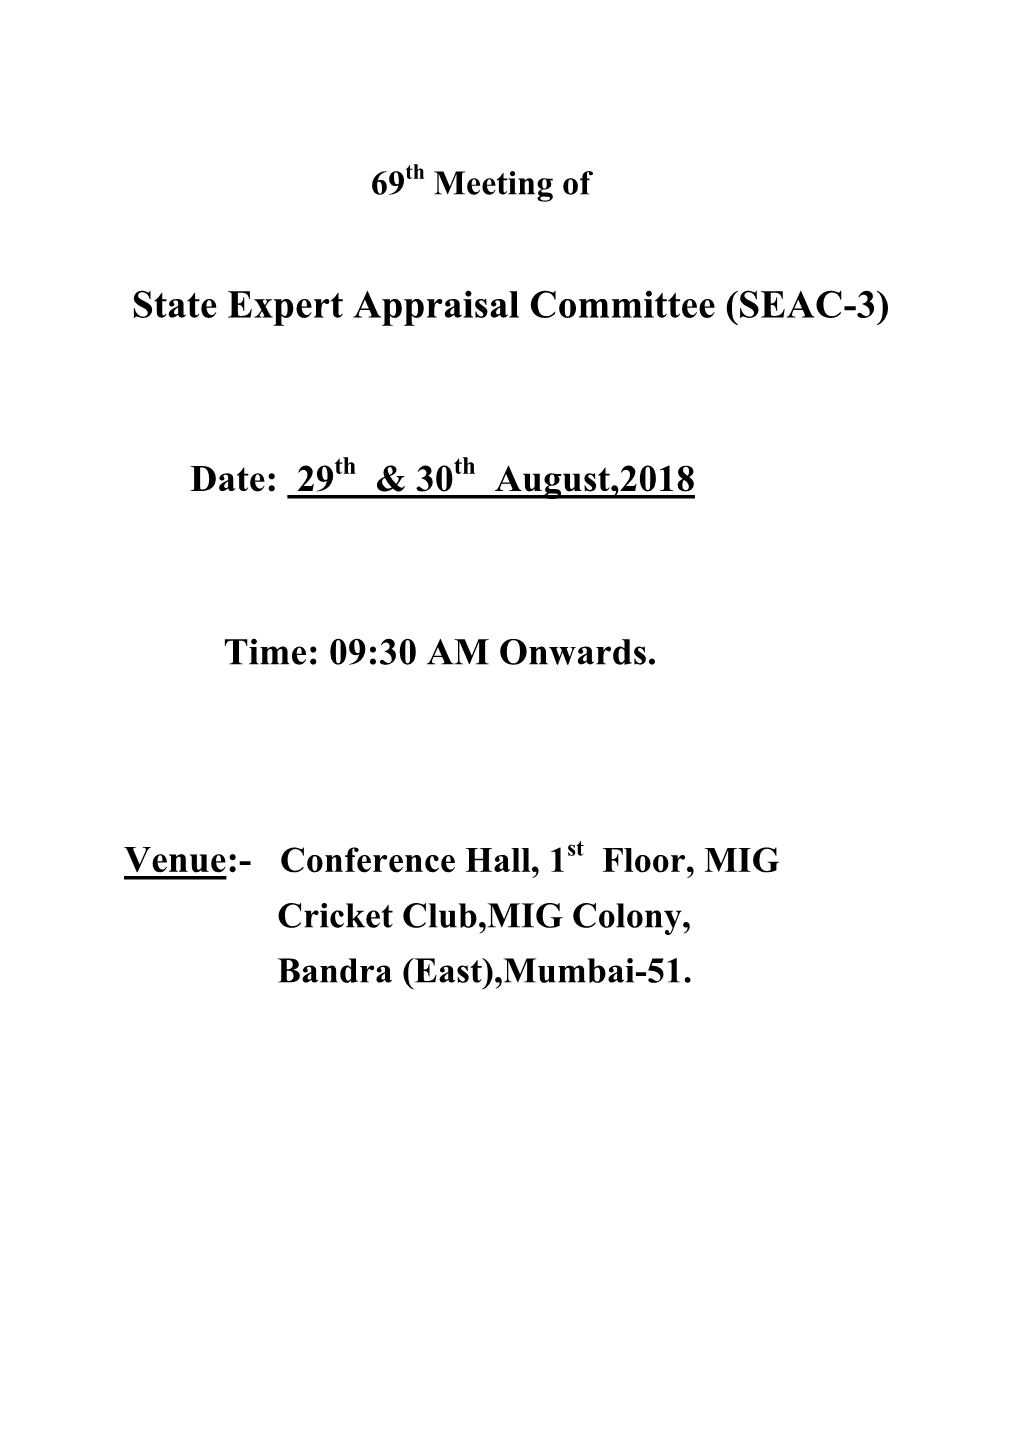 State Expert Appraisal Committee (SEAC-3)